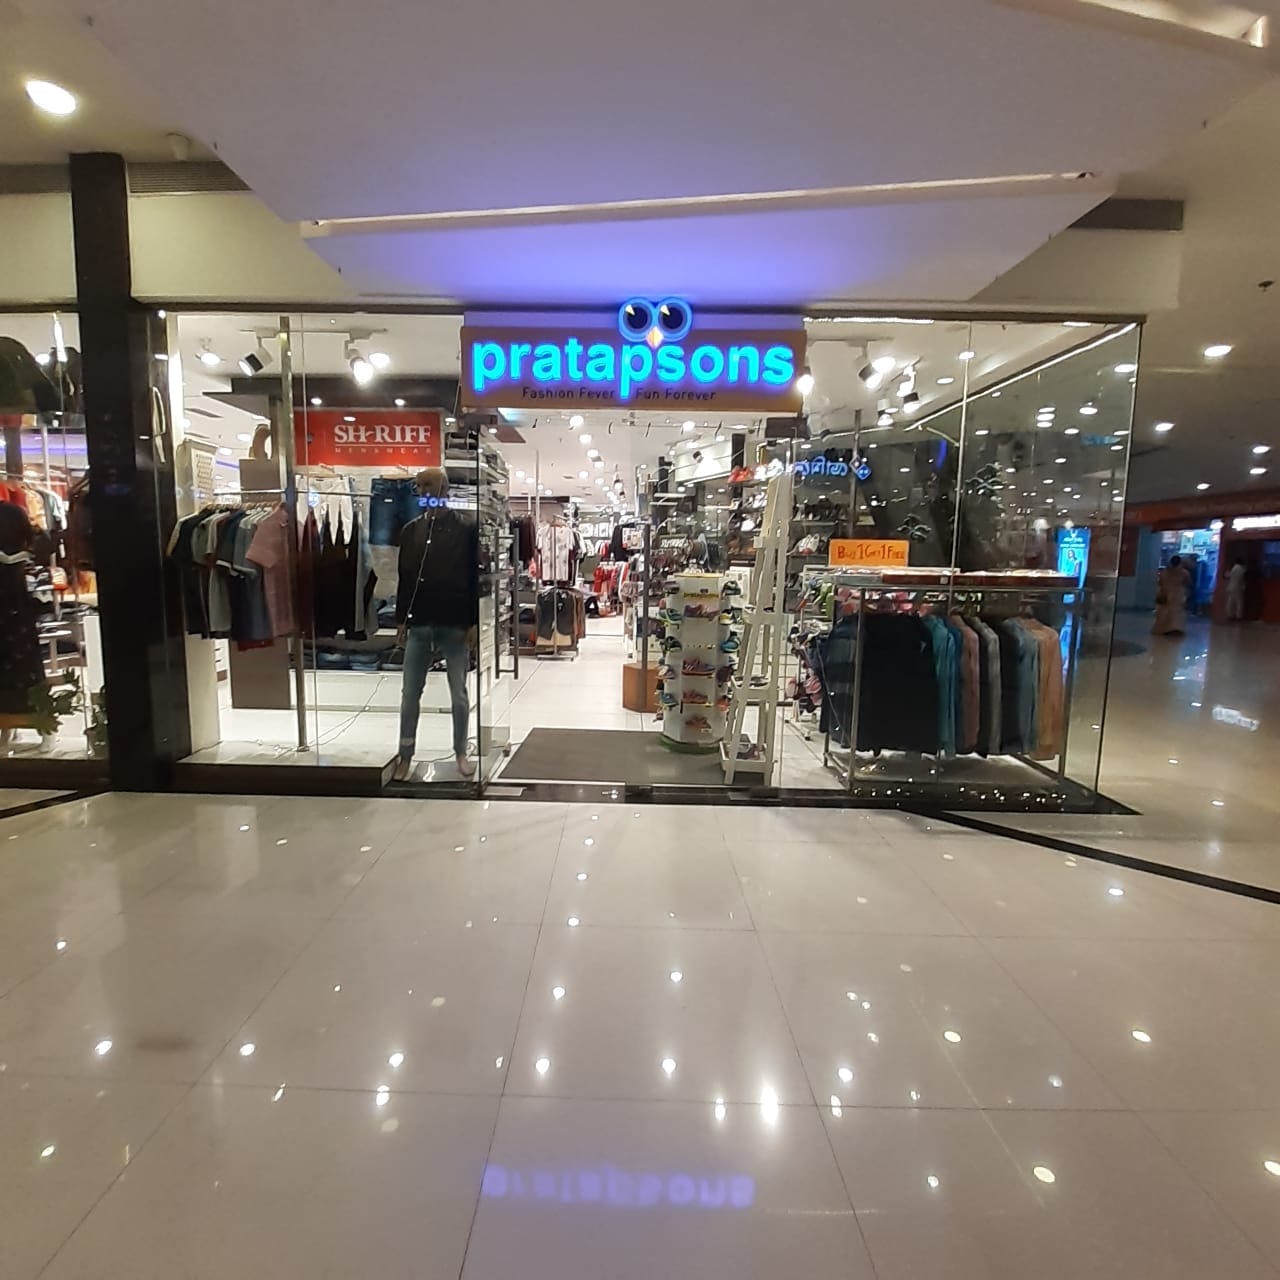 Shopping mall,Building,Outlet store,Retail,Shopping,Boutique,Interior design,Sportswear,Floor,Trade